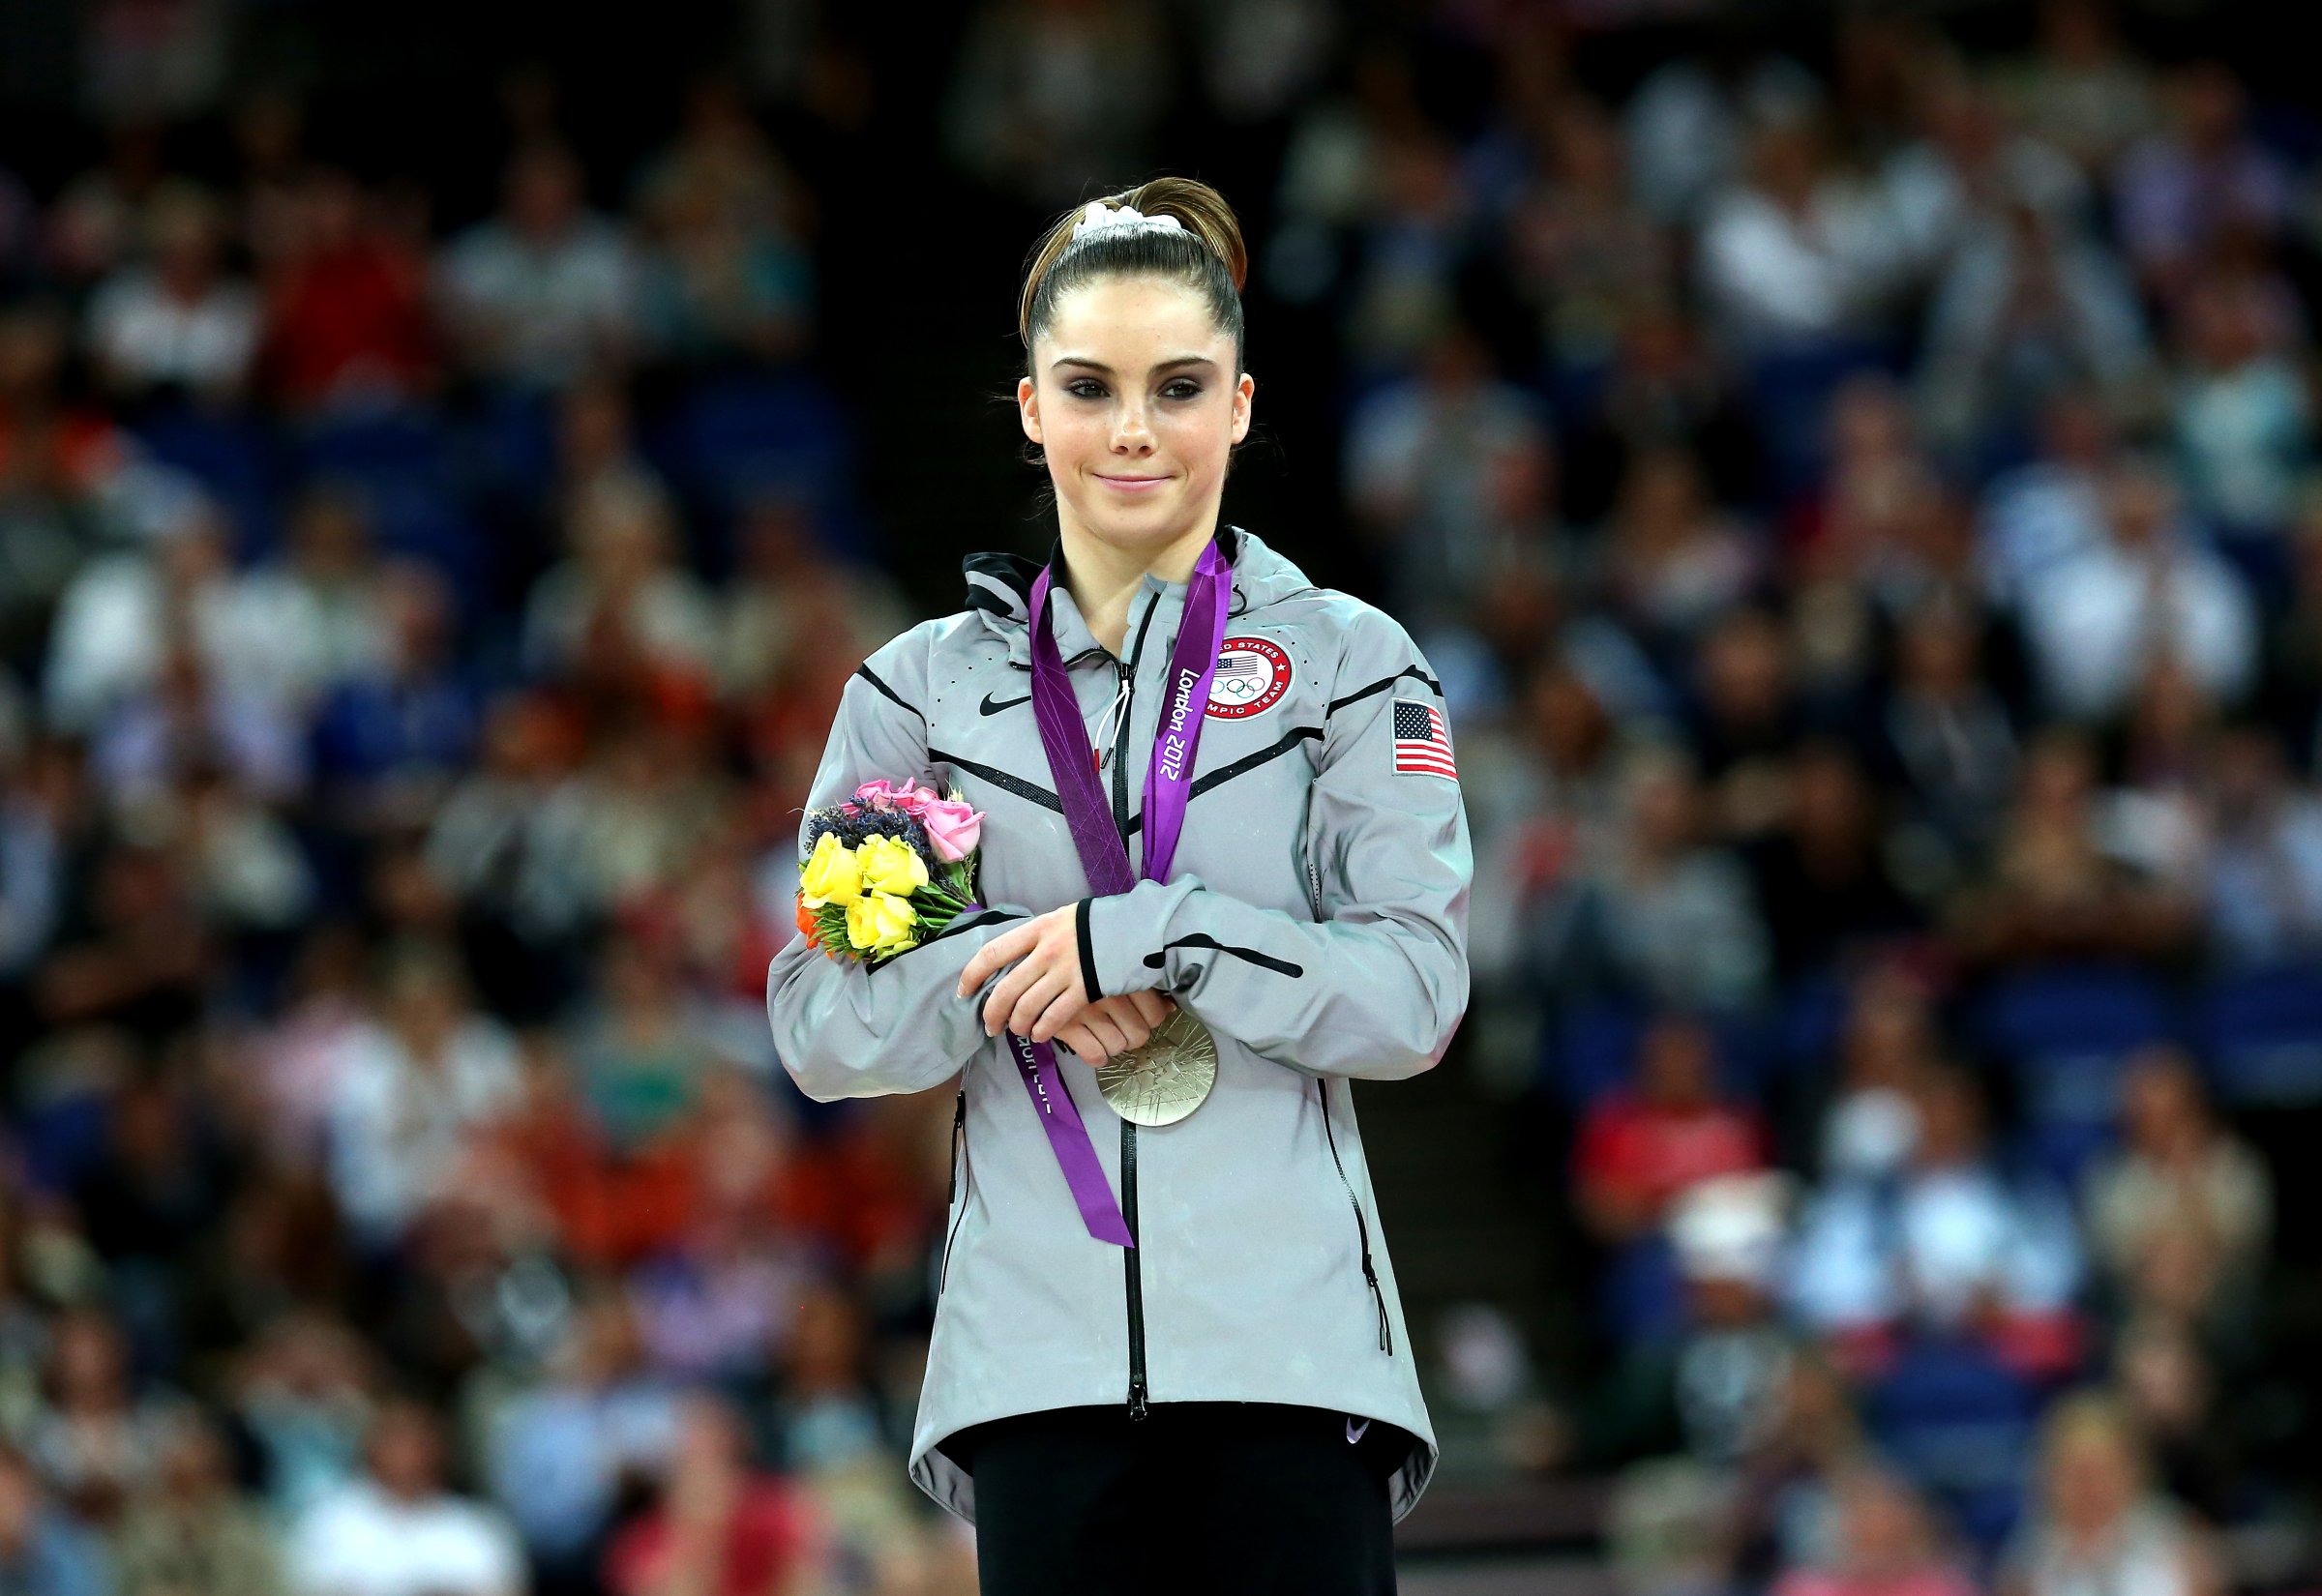 McKayla Maroney stands on the podium with her silver medal during the medal ceremony following the Artistic Gymnastics Women's Vault final of the London 2012 Olympic Games at North Greenwich Arena on August 5, 2012 in London, England.